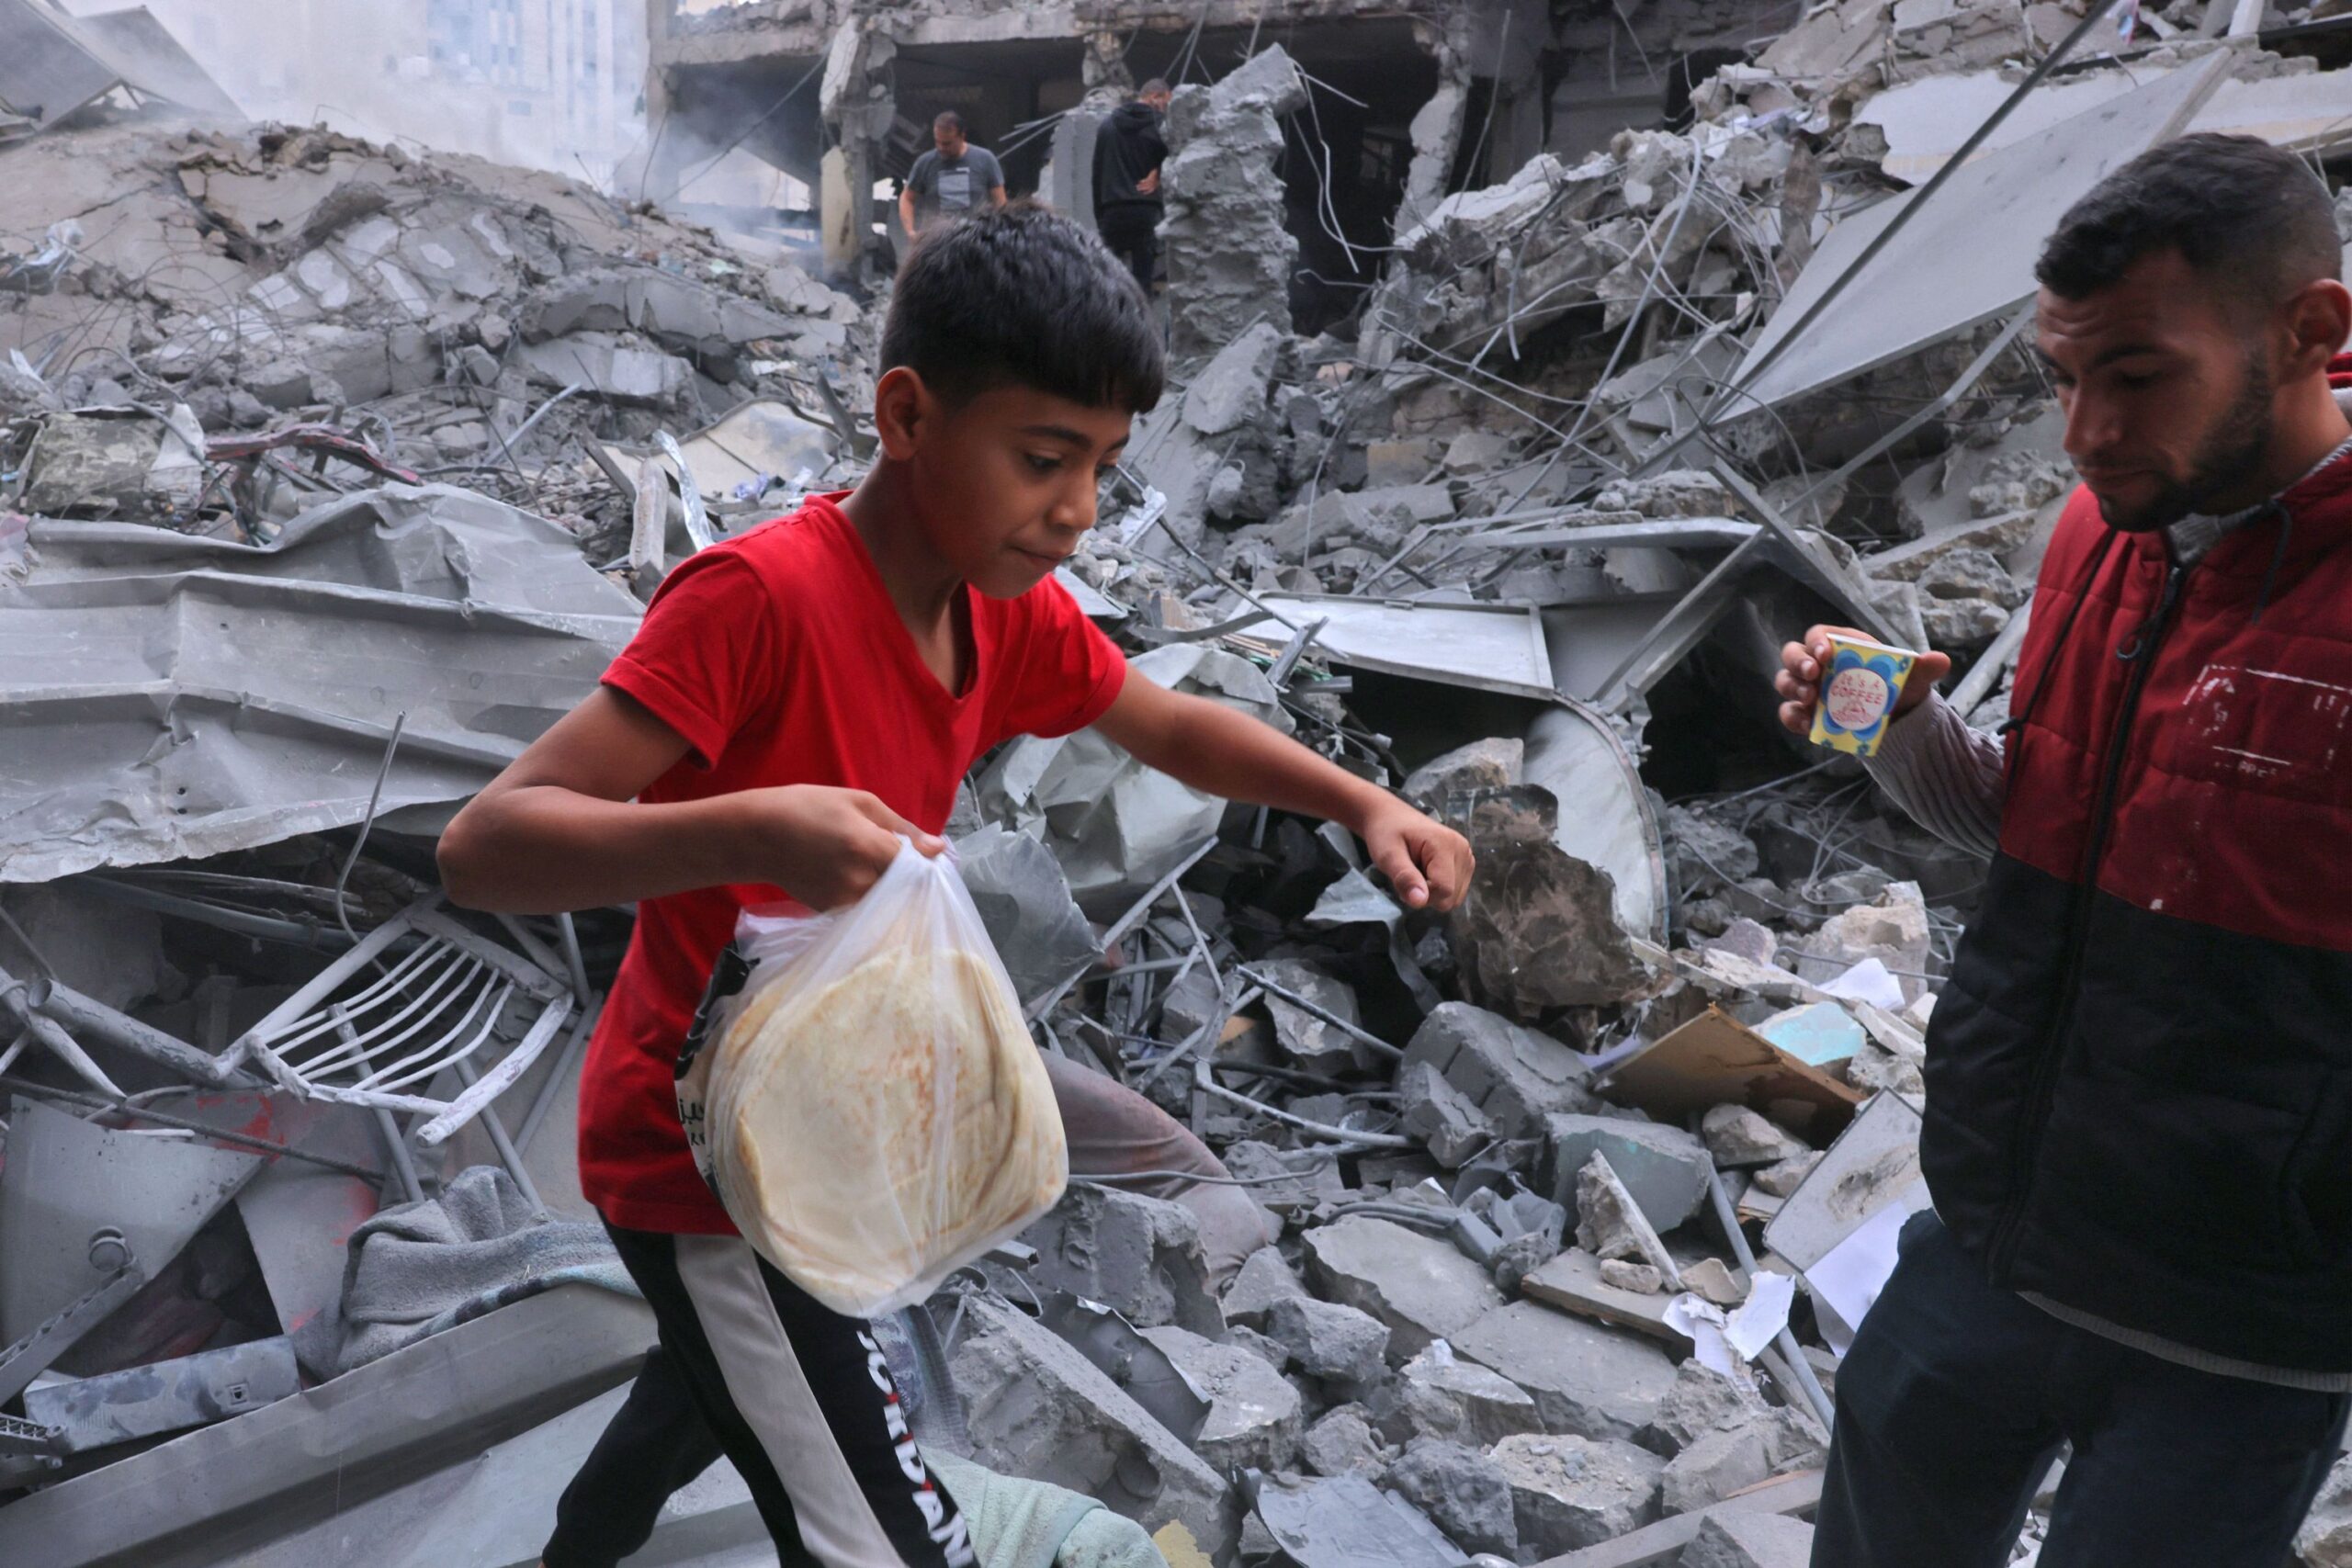 A Palestinian youth carries bread amid the rubble of the city center of Khan Yunis in the southern ...